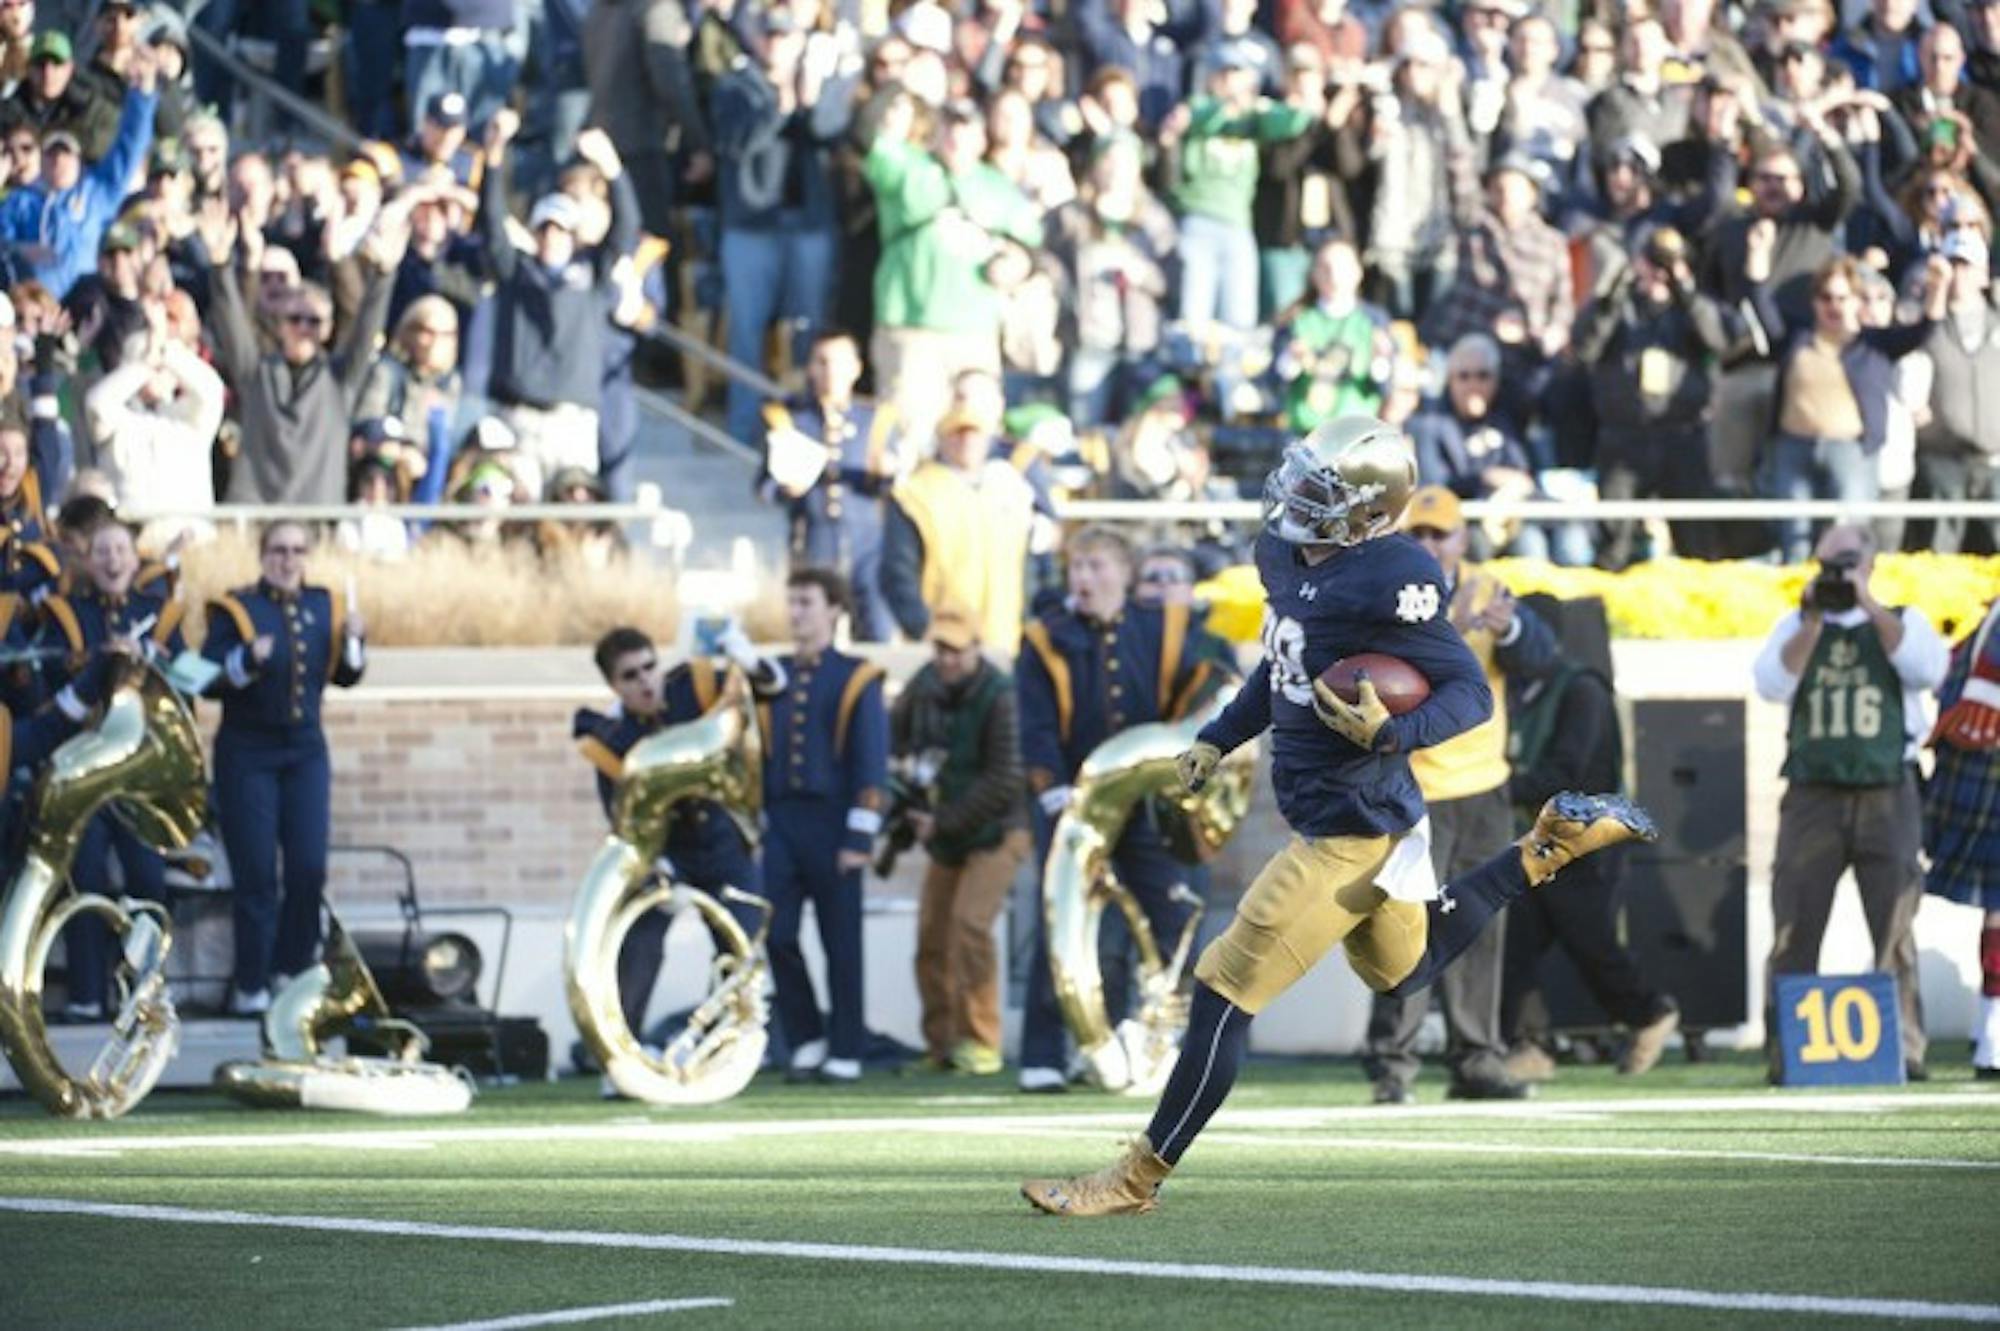 Irish sophomore defensive lineman Andrew Trumbetti runs into the end zone as he returns an interception for a 28-yard touchdown during Notre Dame’s 28-7 win over Wake Forest on Saturday at Notre Dame Stadium. The interception was Trumbetti’s first in just his second career start, and put Notre Dame up 14-0 late in the first quarter.